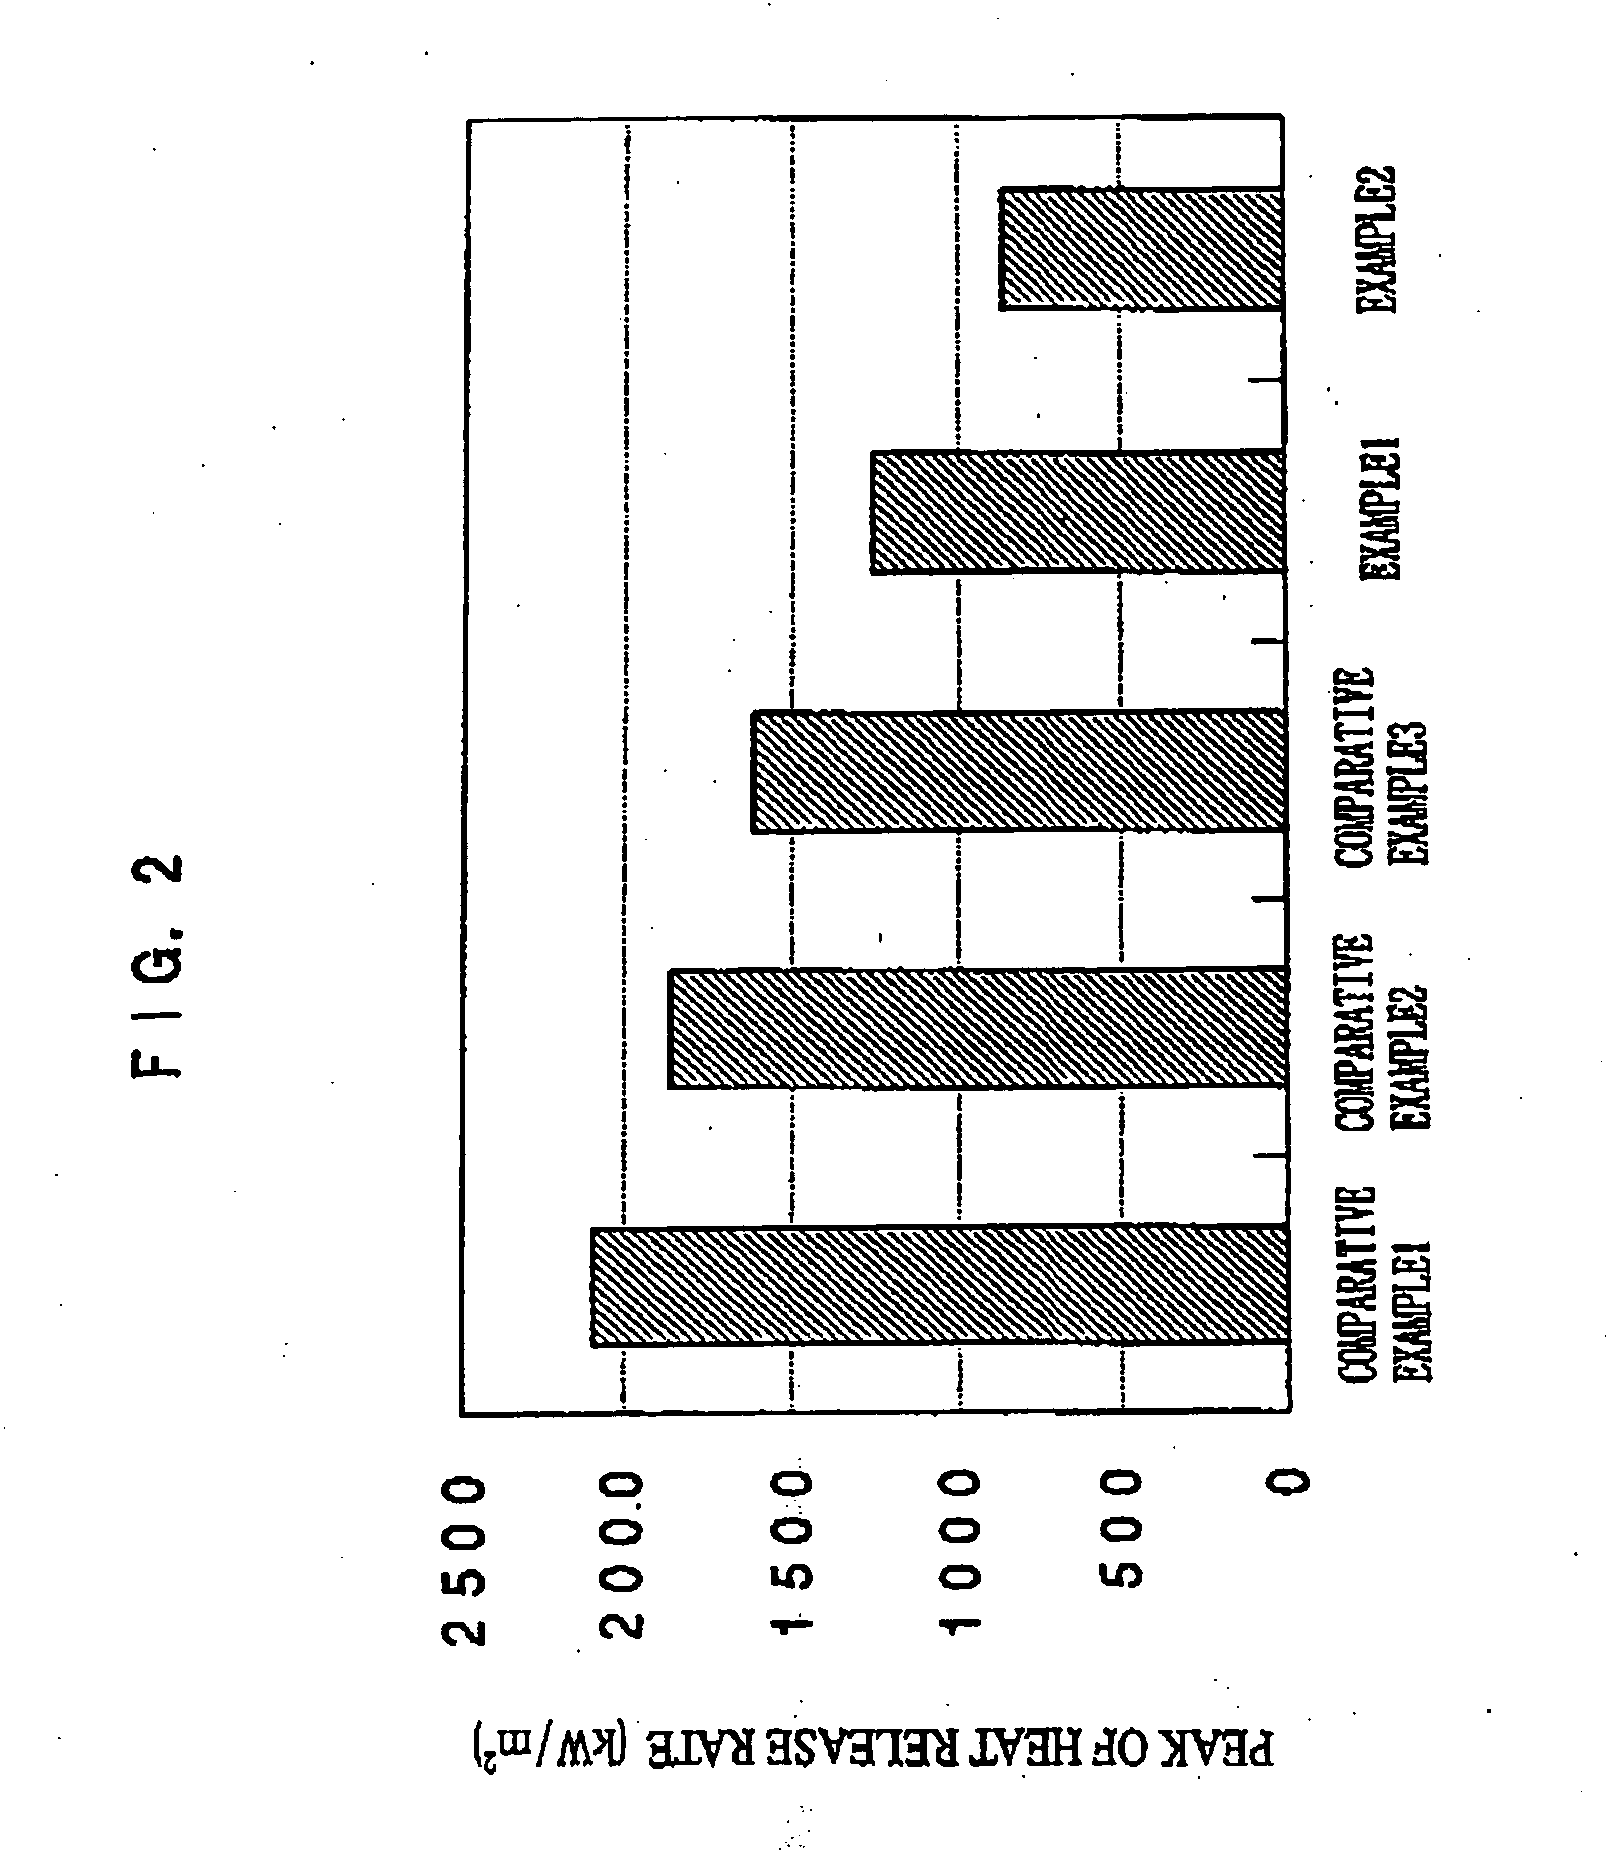 Flame-retardant resin composition, process for producing the same, flame-retardant-resin formed article, and process for producing flame-retardant fine particle